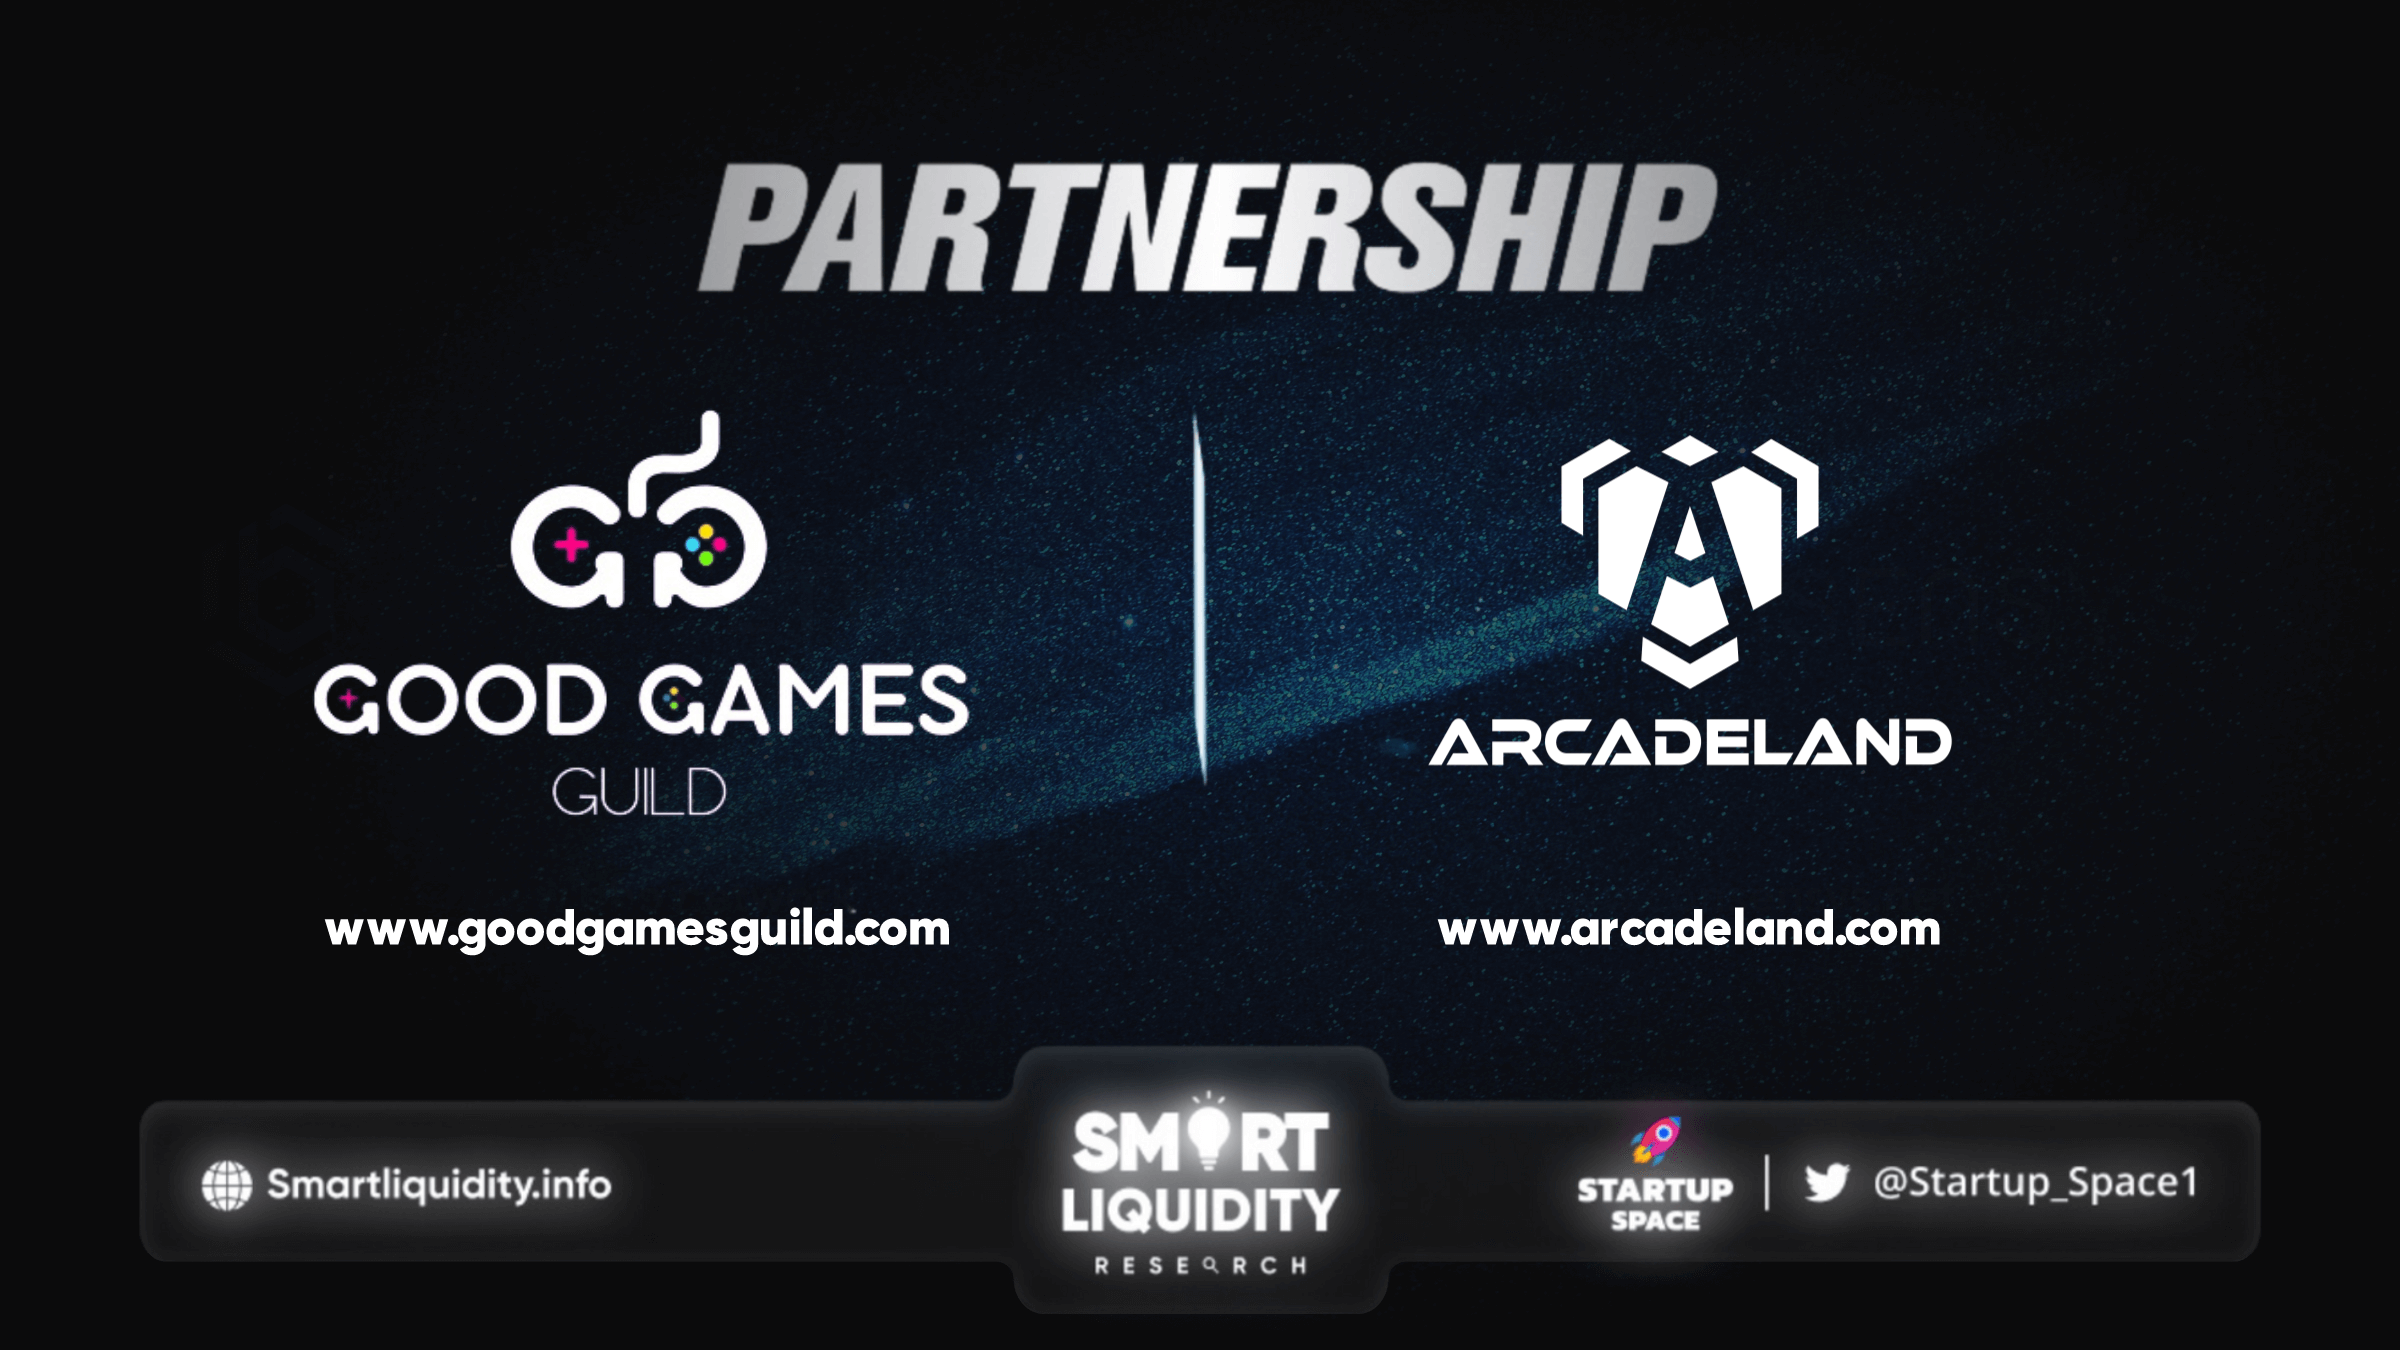 Good Games Guild Partners with ArcadeLand